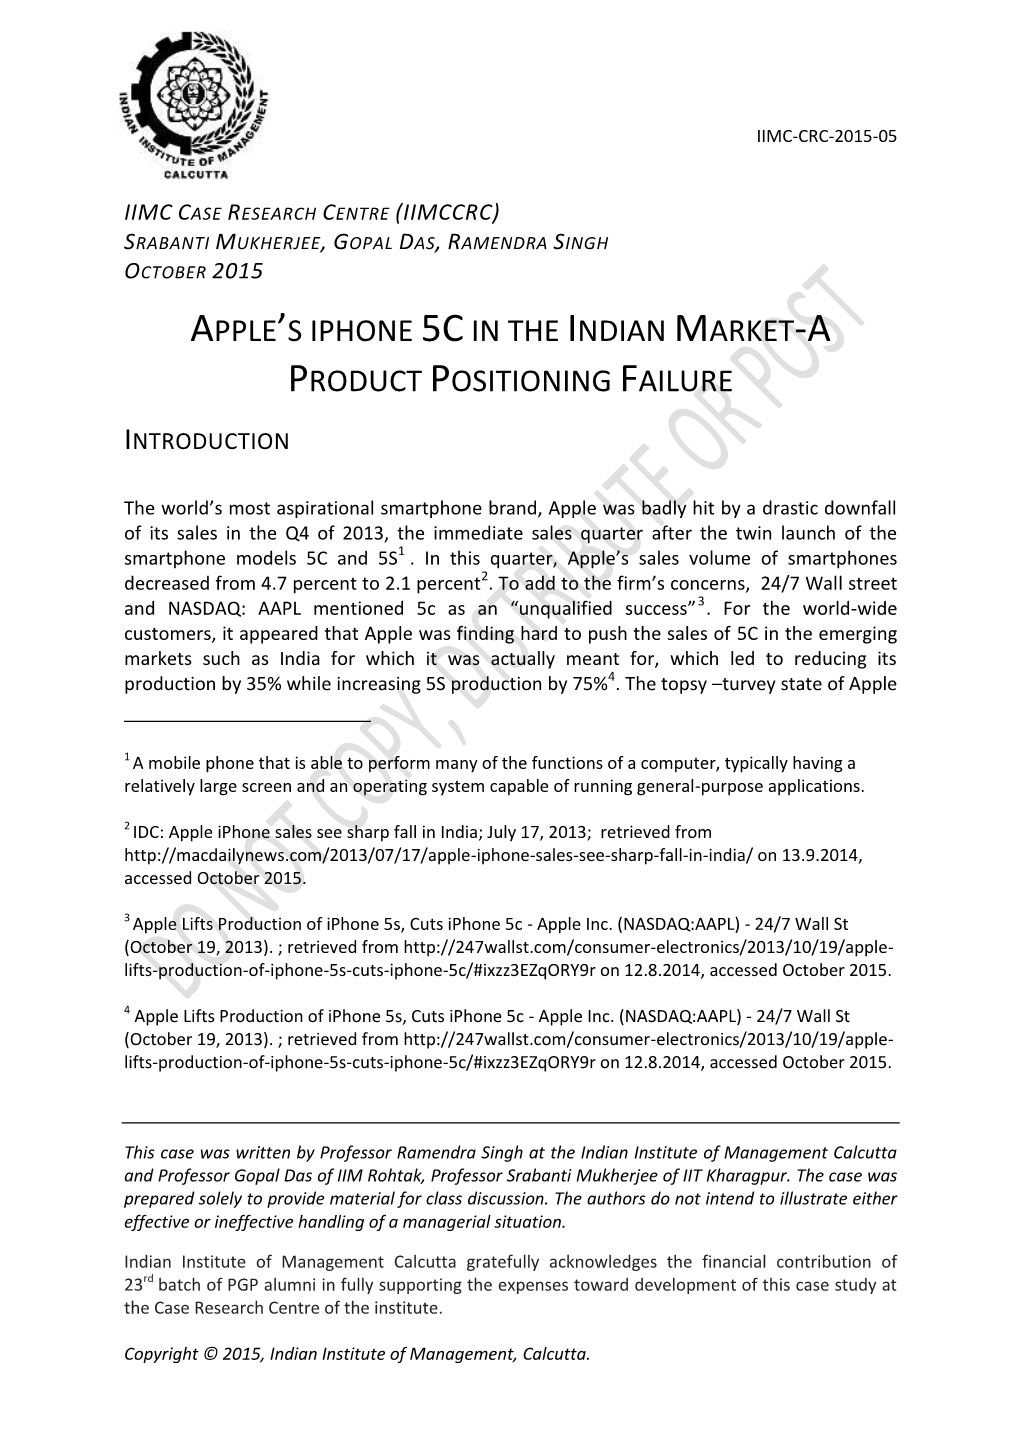 Apple's Iphone 5Cin the Indian Market-A Product Positioning Failure